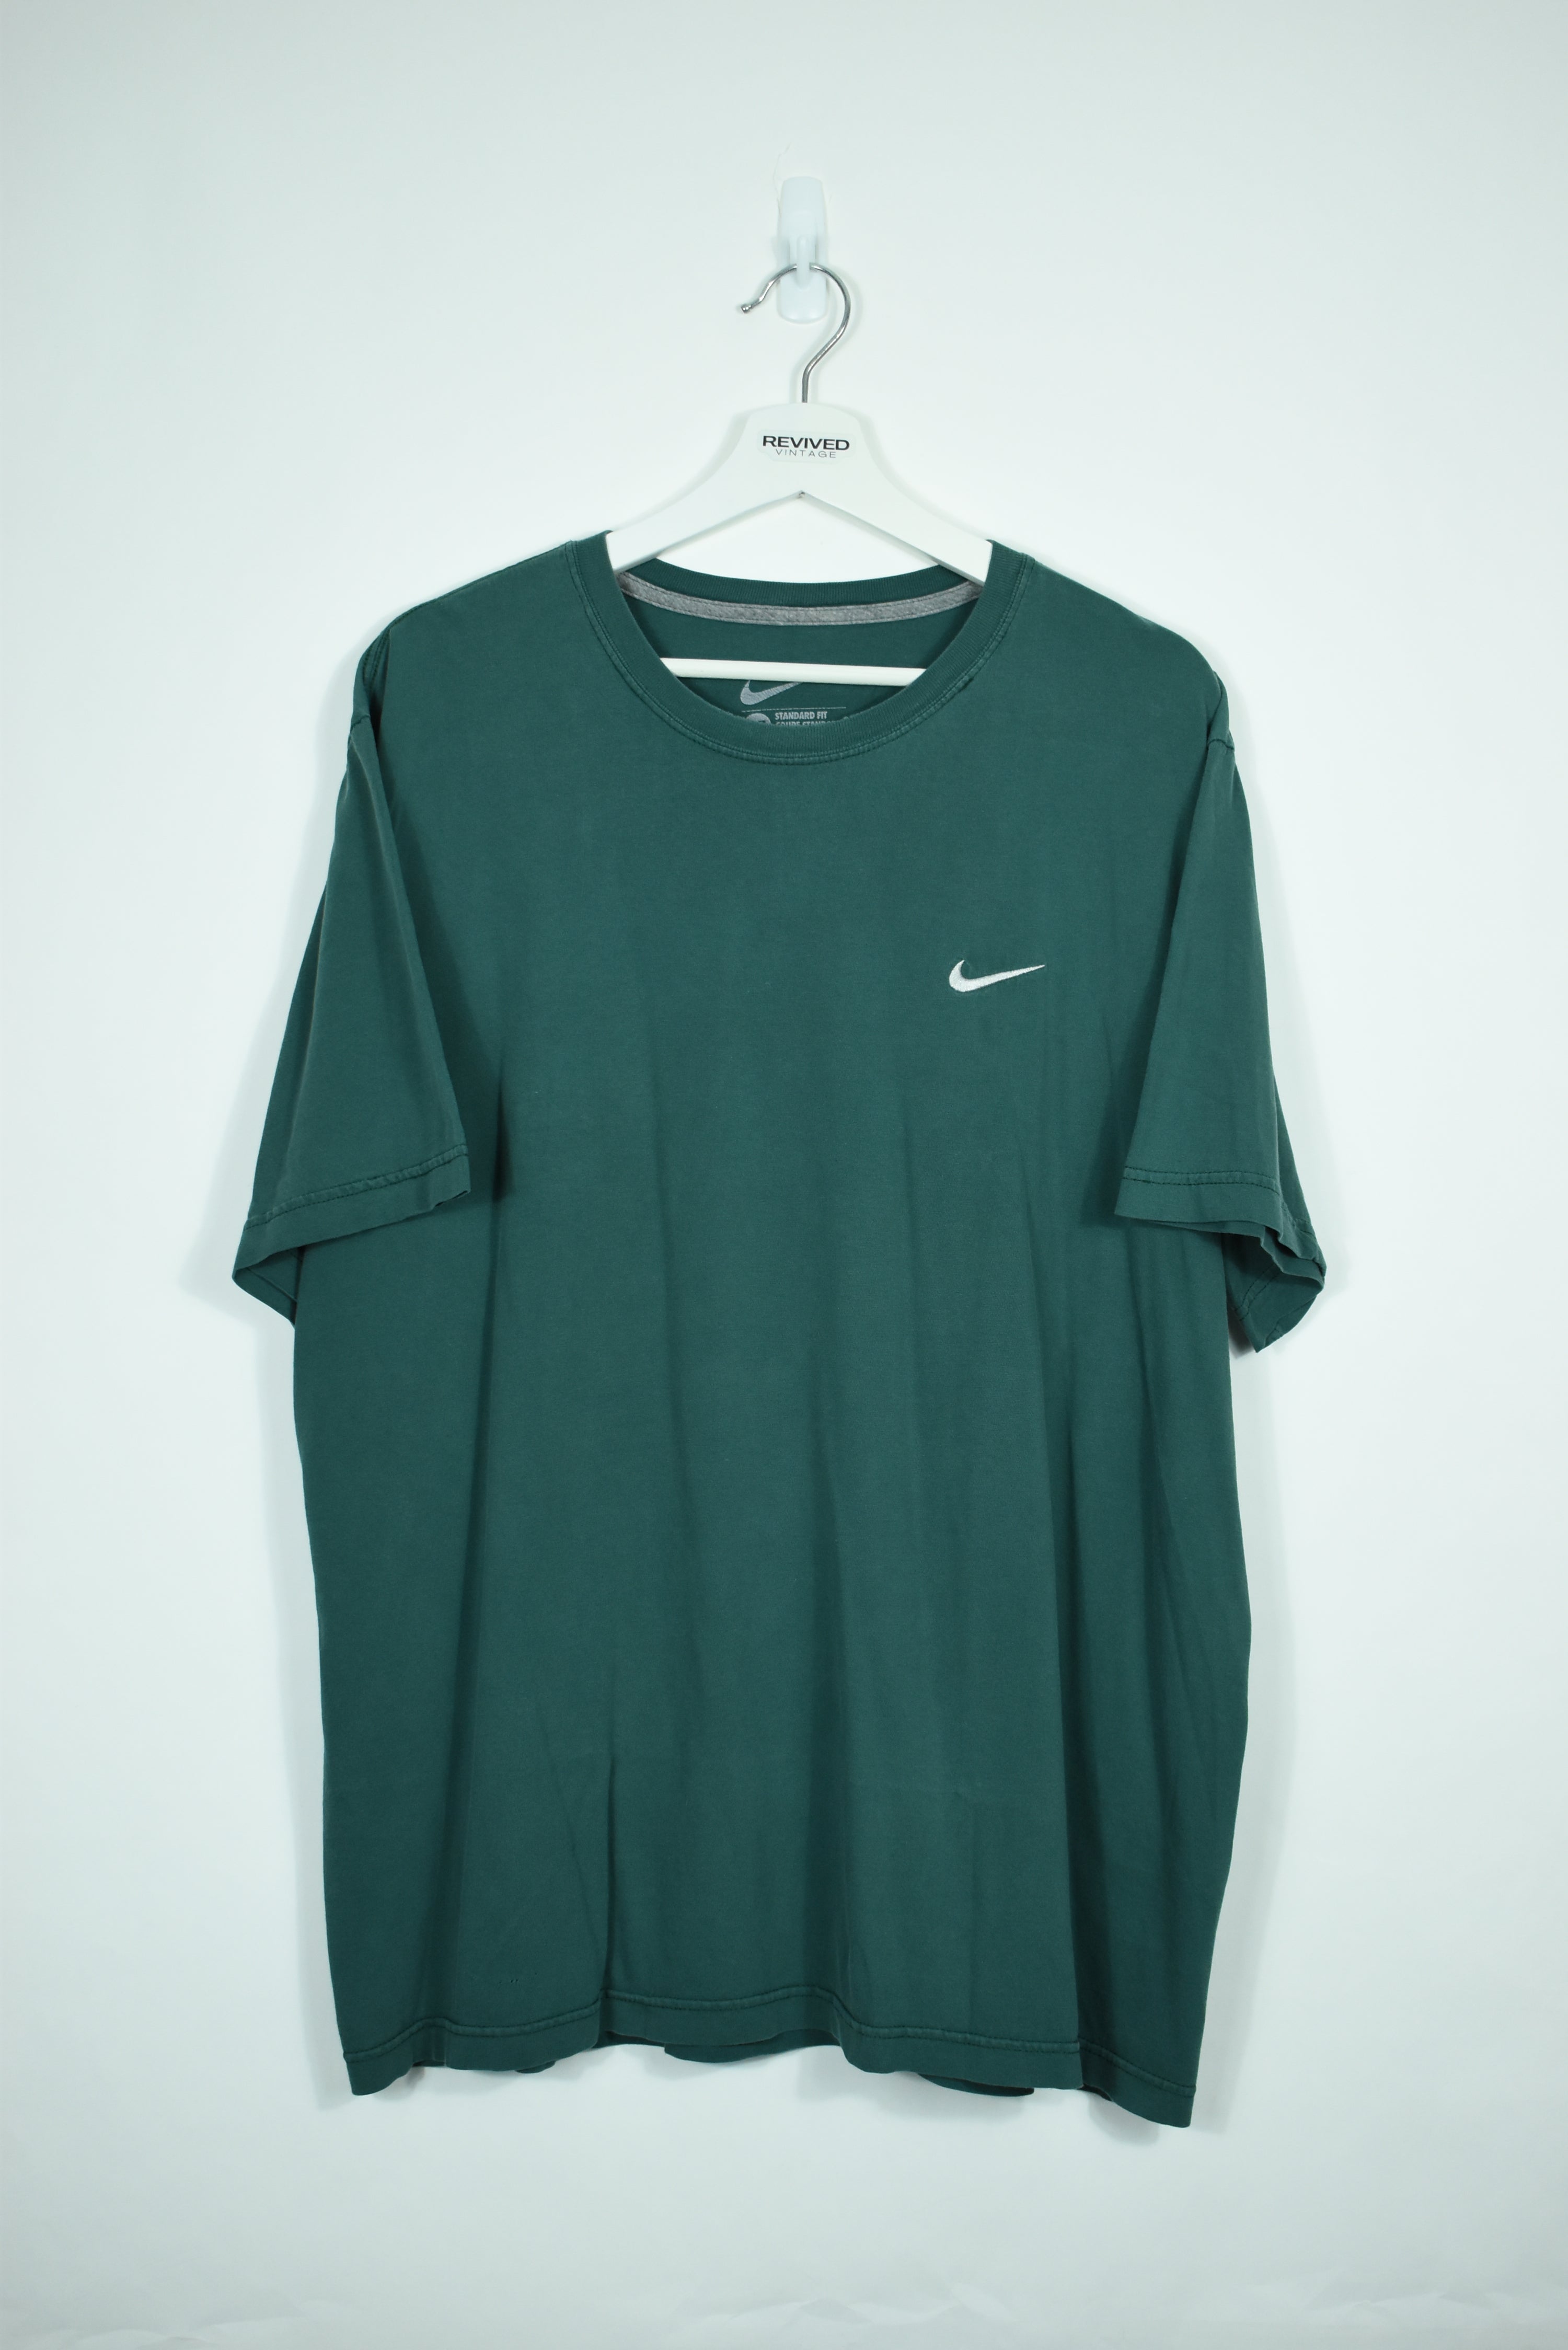 VINTAGE NIKE FORREST GREEN SMALL SWOOSH T SHIRT LARGE